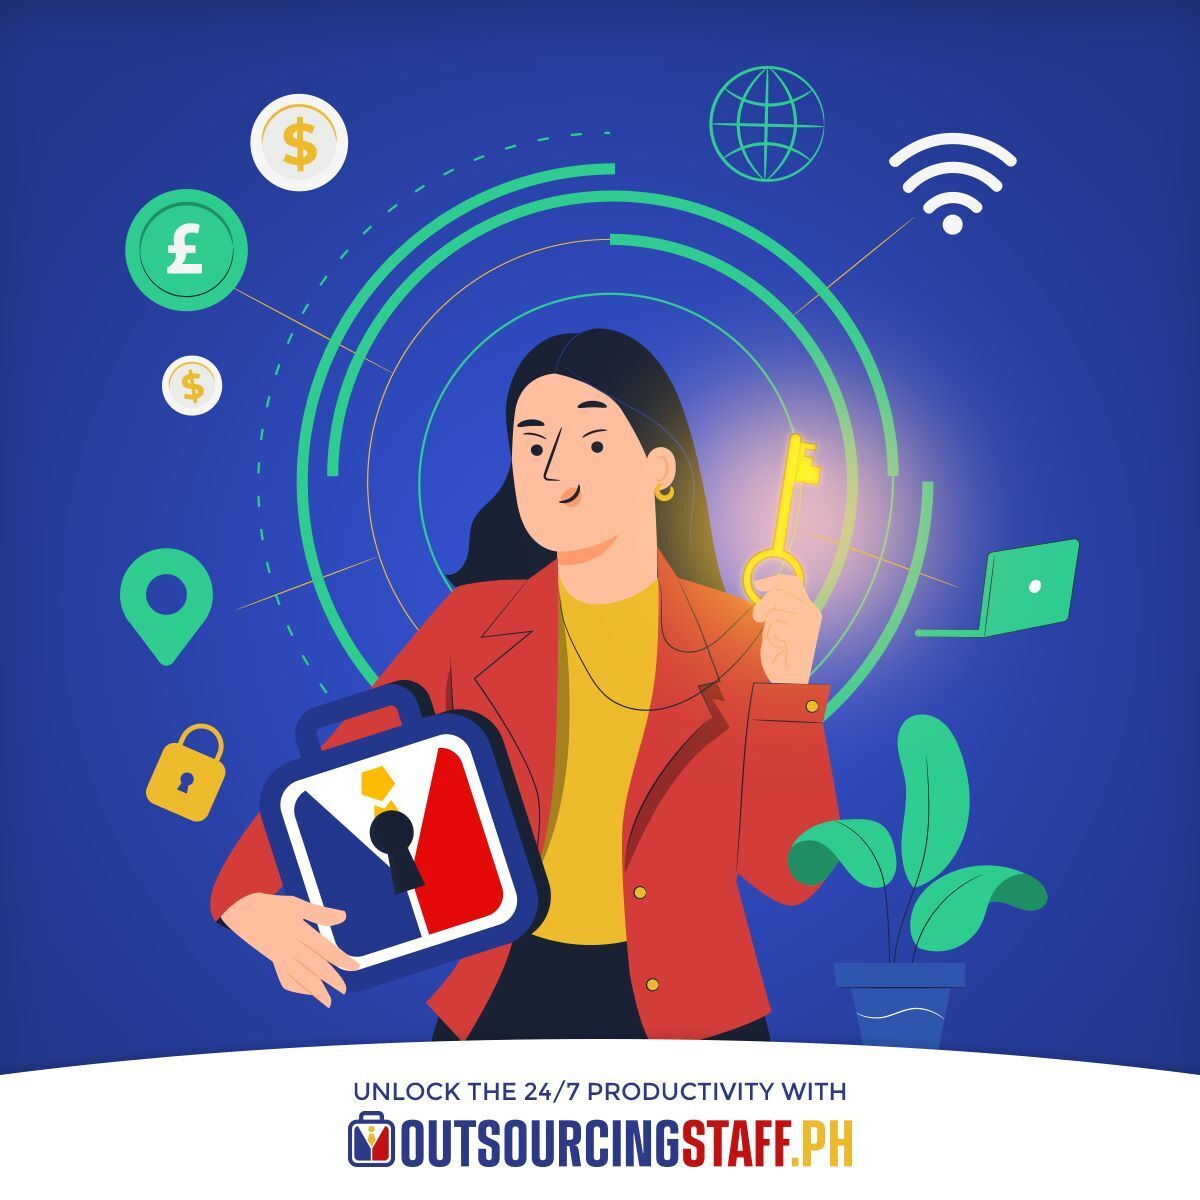 OutsourcingStaff.ph is an online job portal and marketplace for those looking for work in the Philippines and for organizations looking at hiring professionals from the country.